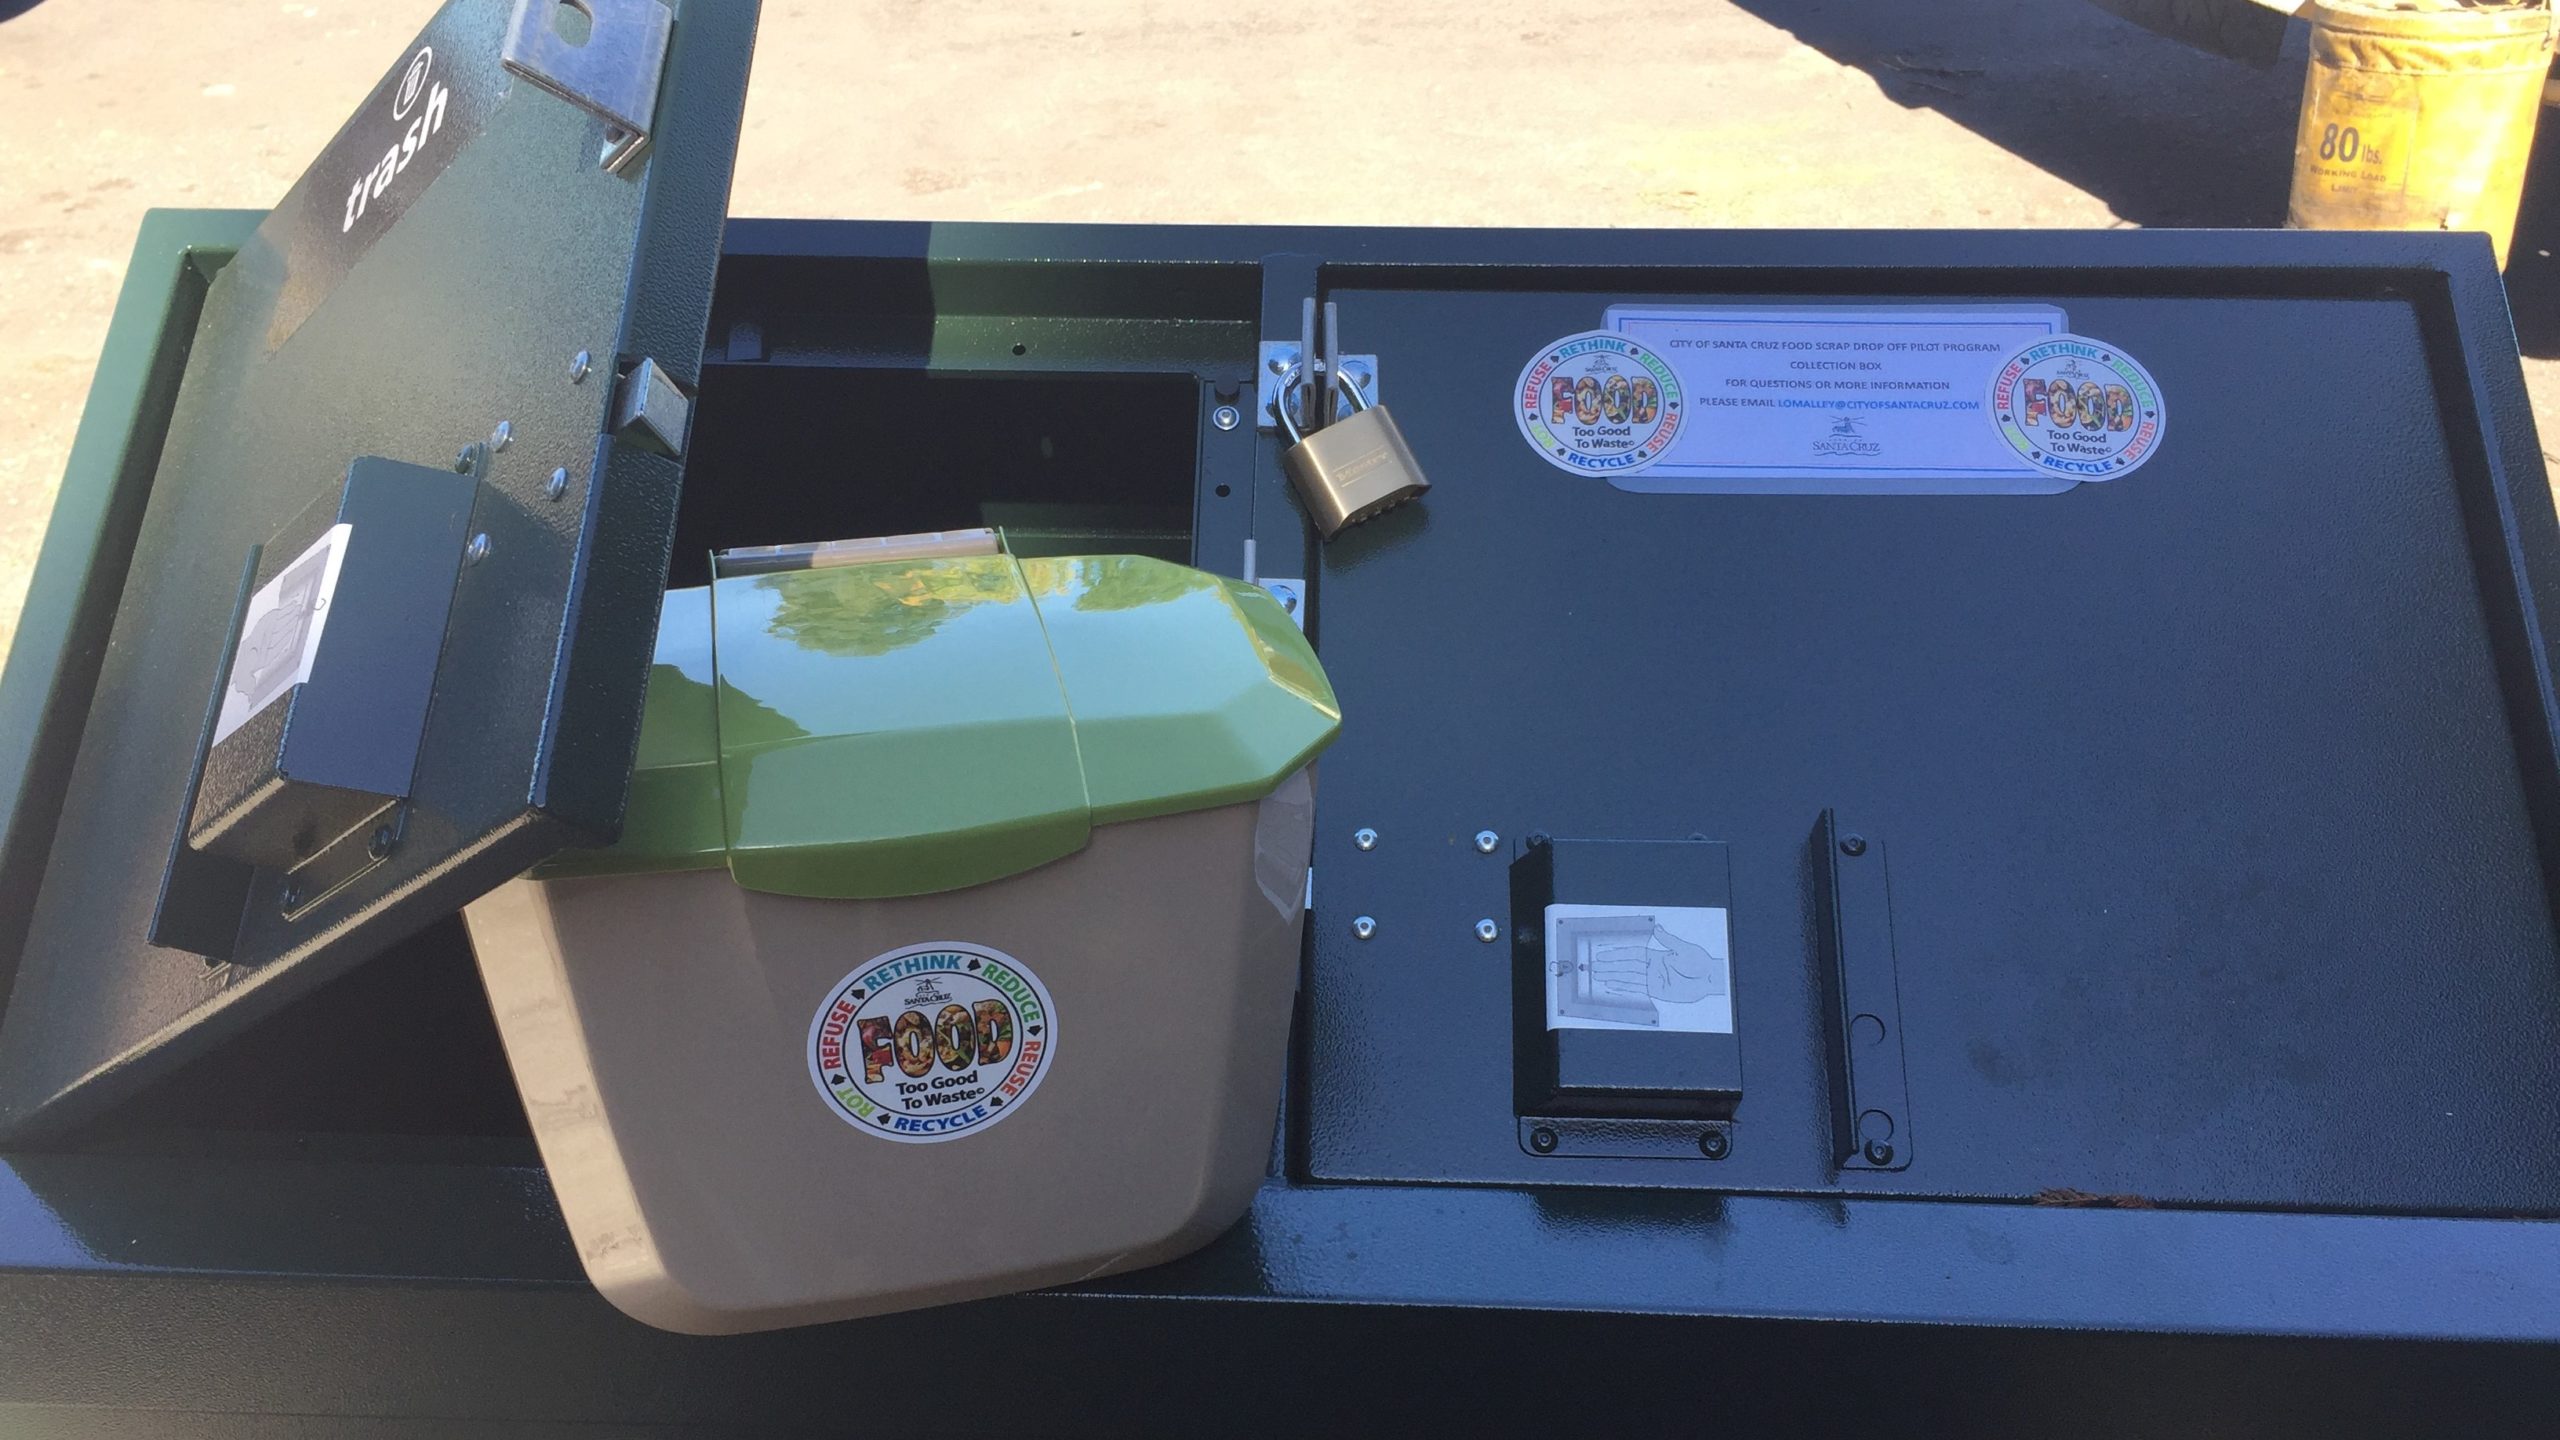 Smart Bins: New Ways to Divert Food Waste, and Keep Our City Green, by NYC  Sanitation